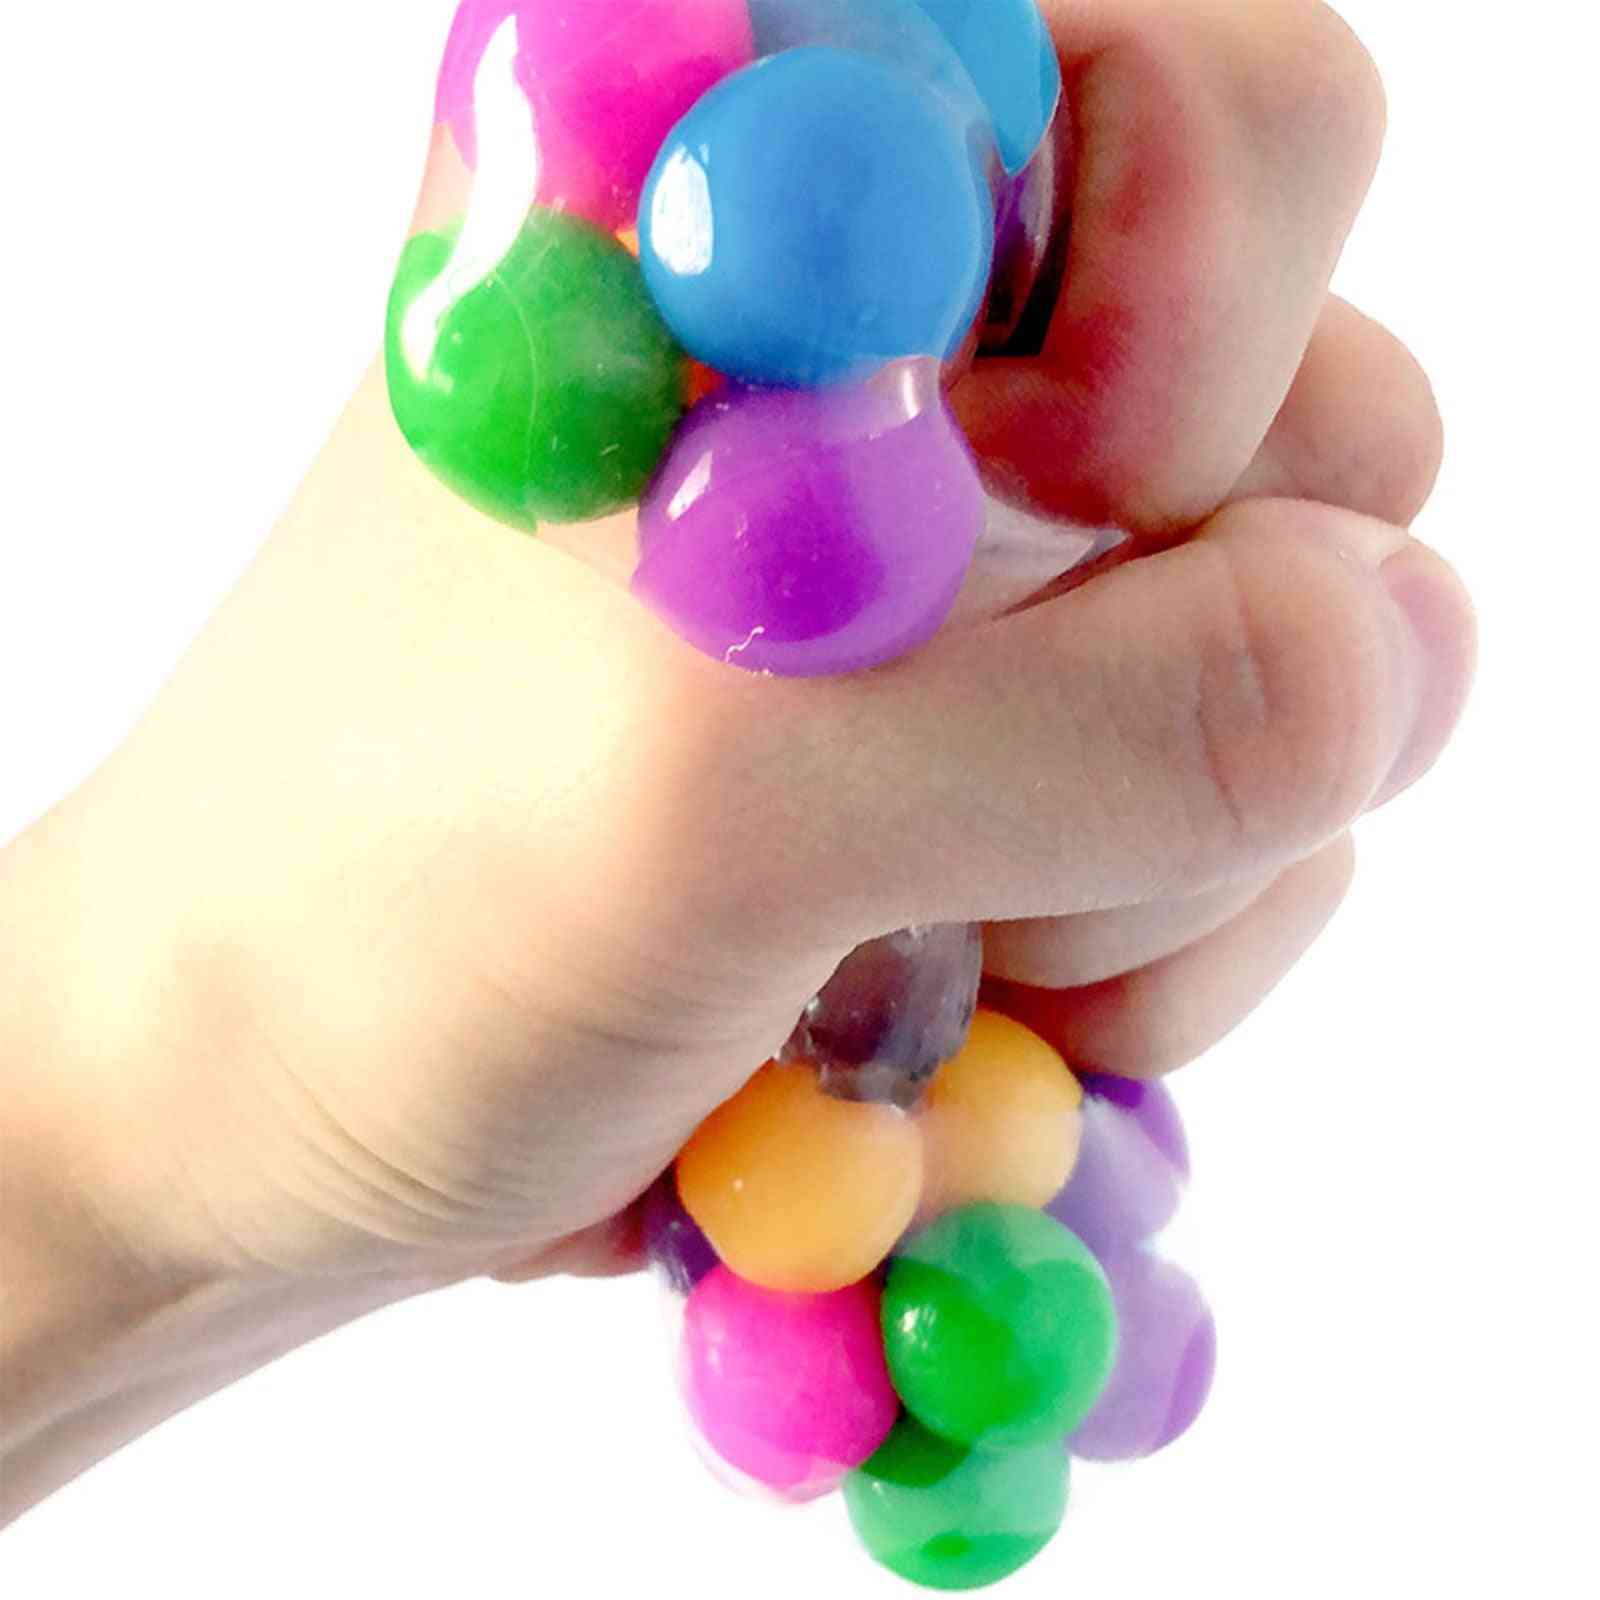 Colorful Beads, Relieve Stress, Hand Exercise, Squeeze Ball Toy